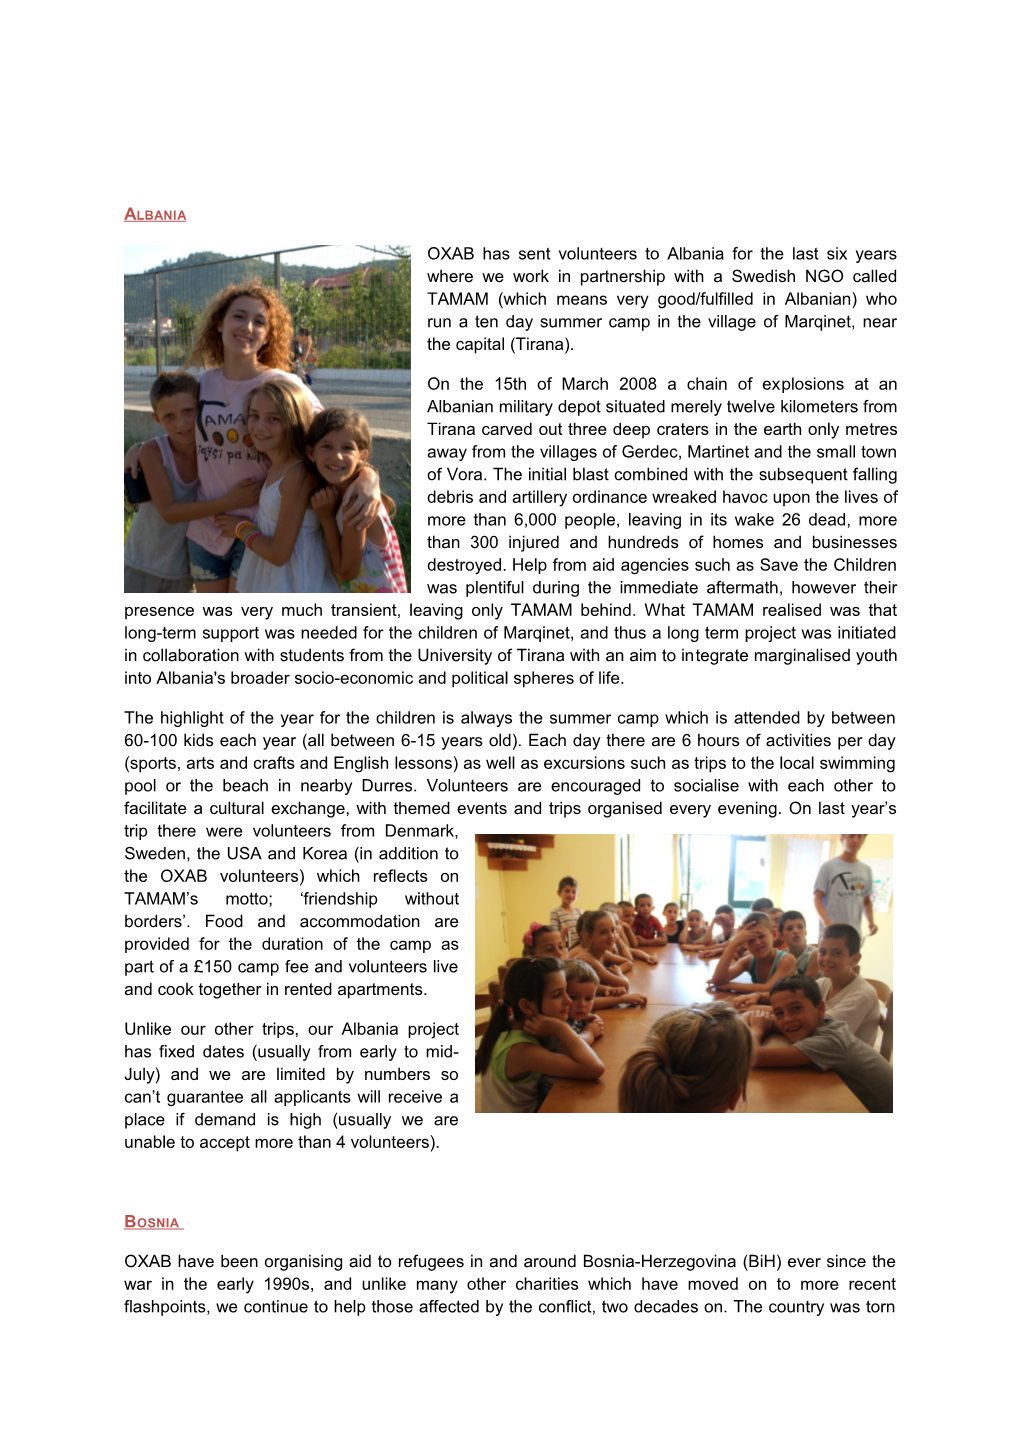 OXAB Has Sent Volunteers to Albania for the Last Six Years Where We Work in Partnership